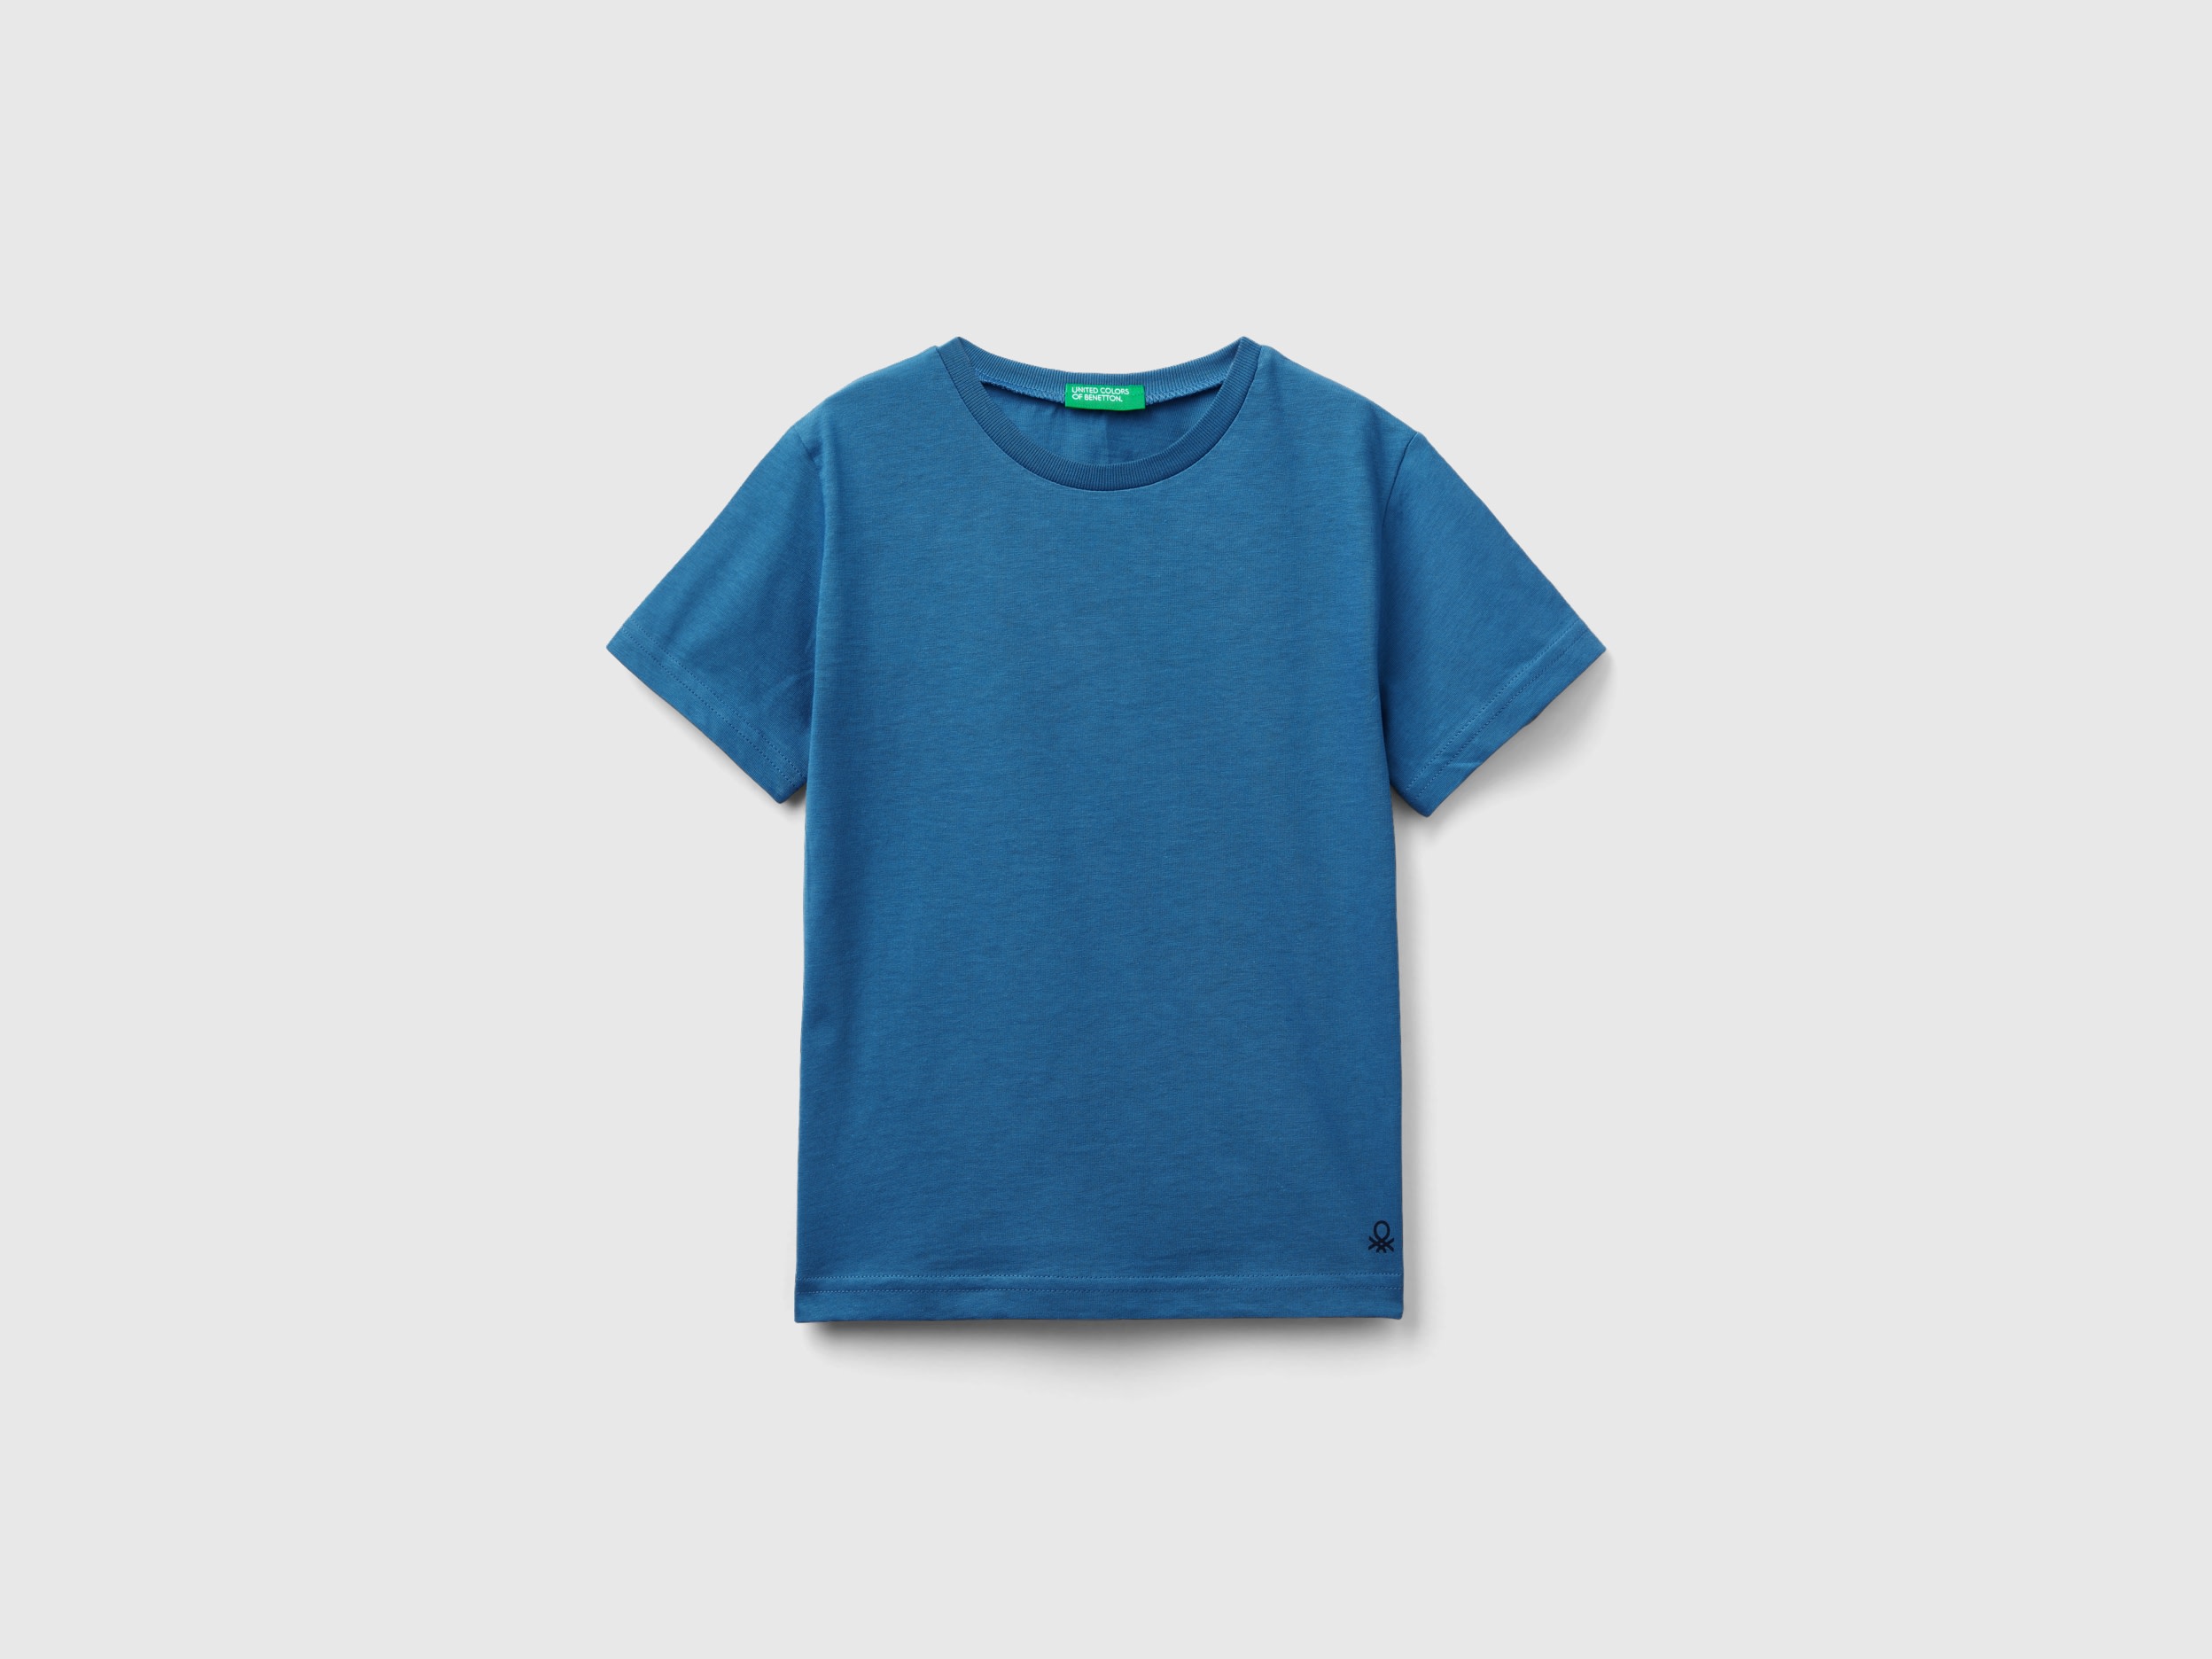 Image of Benetton, T-shirt In Organic Cotton, size 104, Blue, Kids